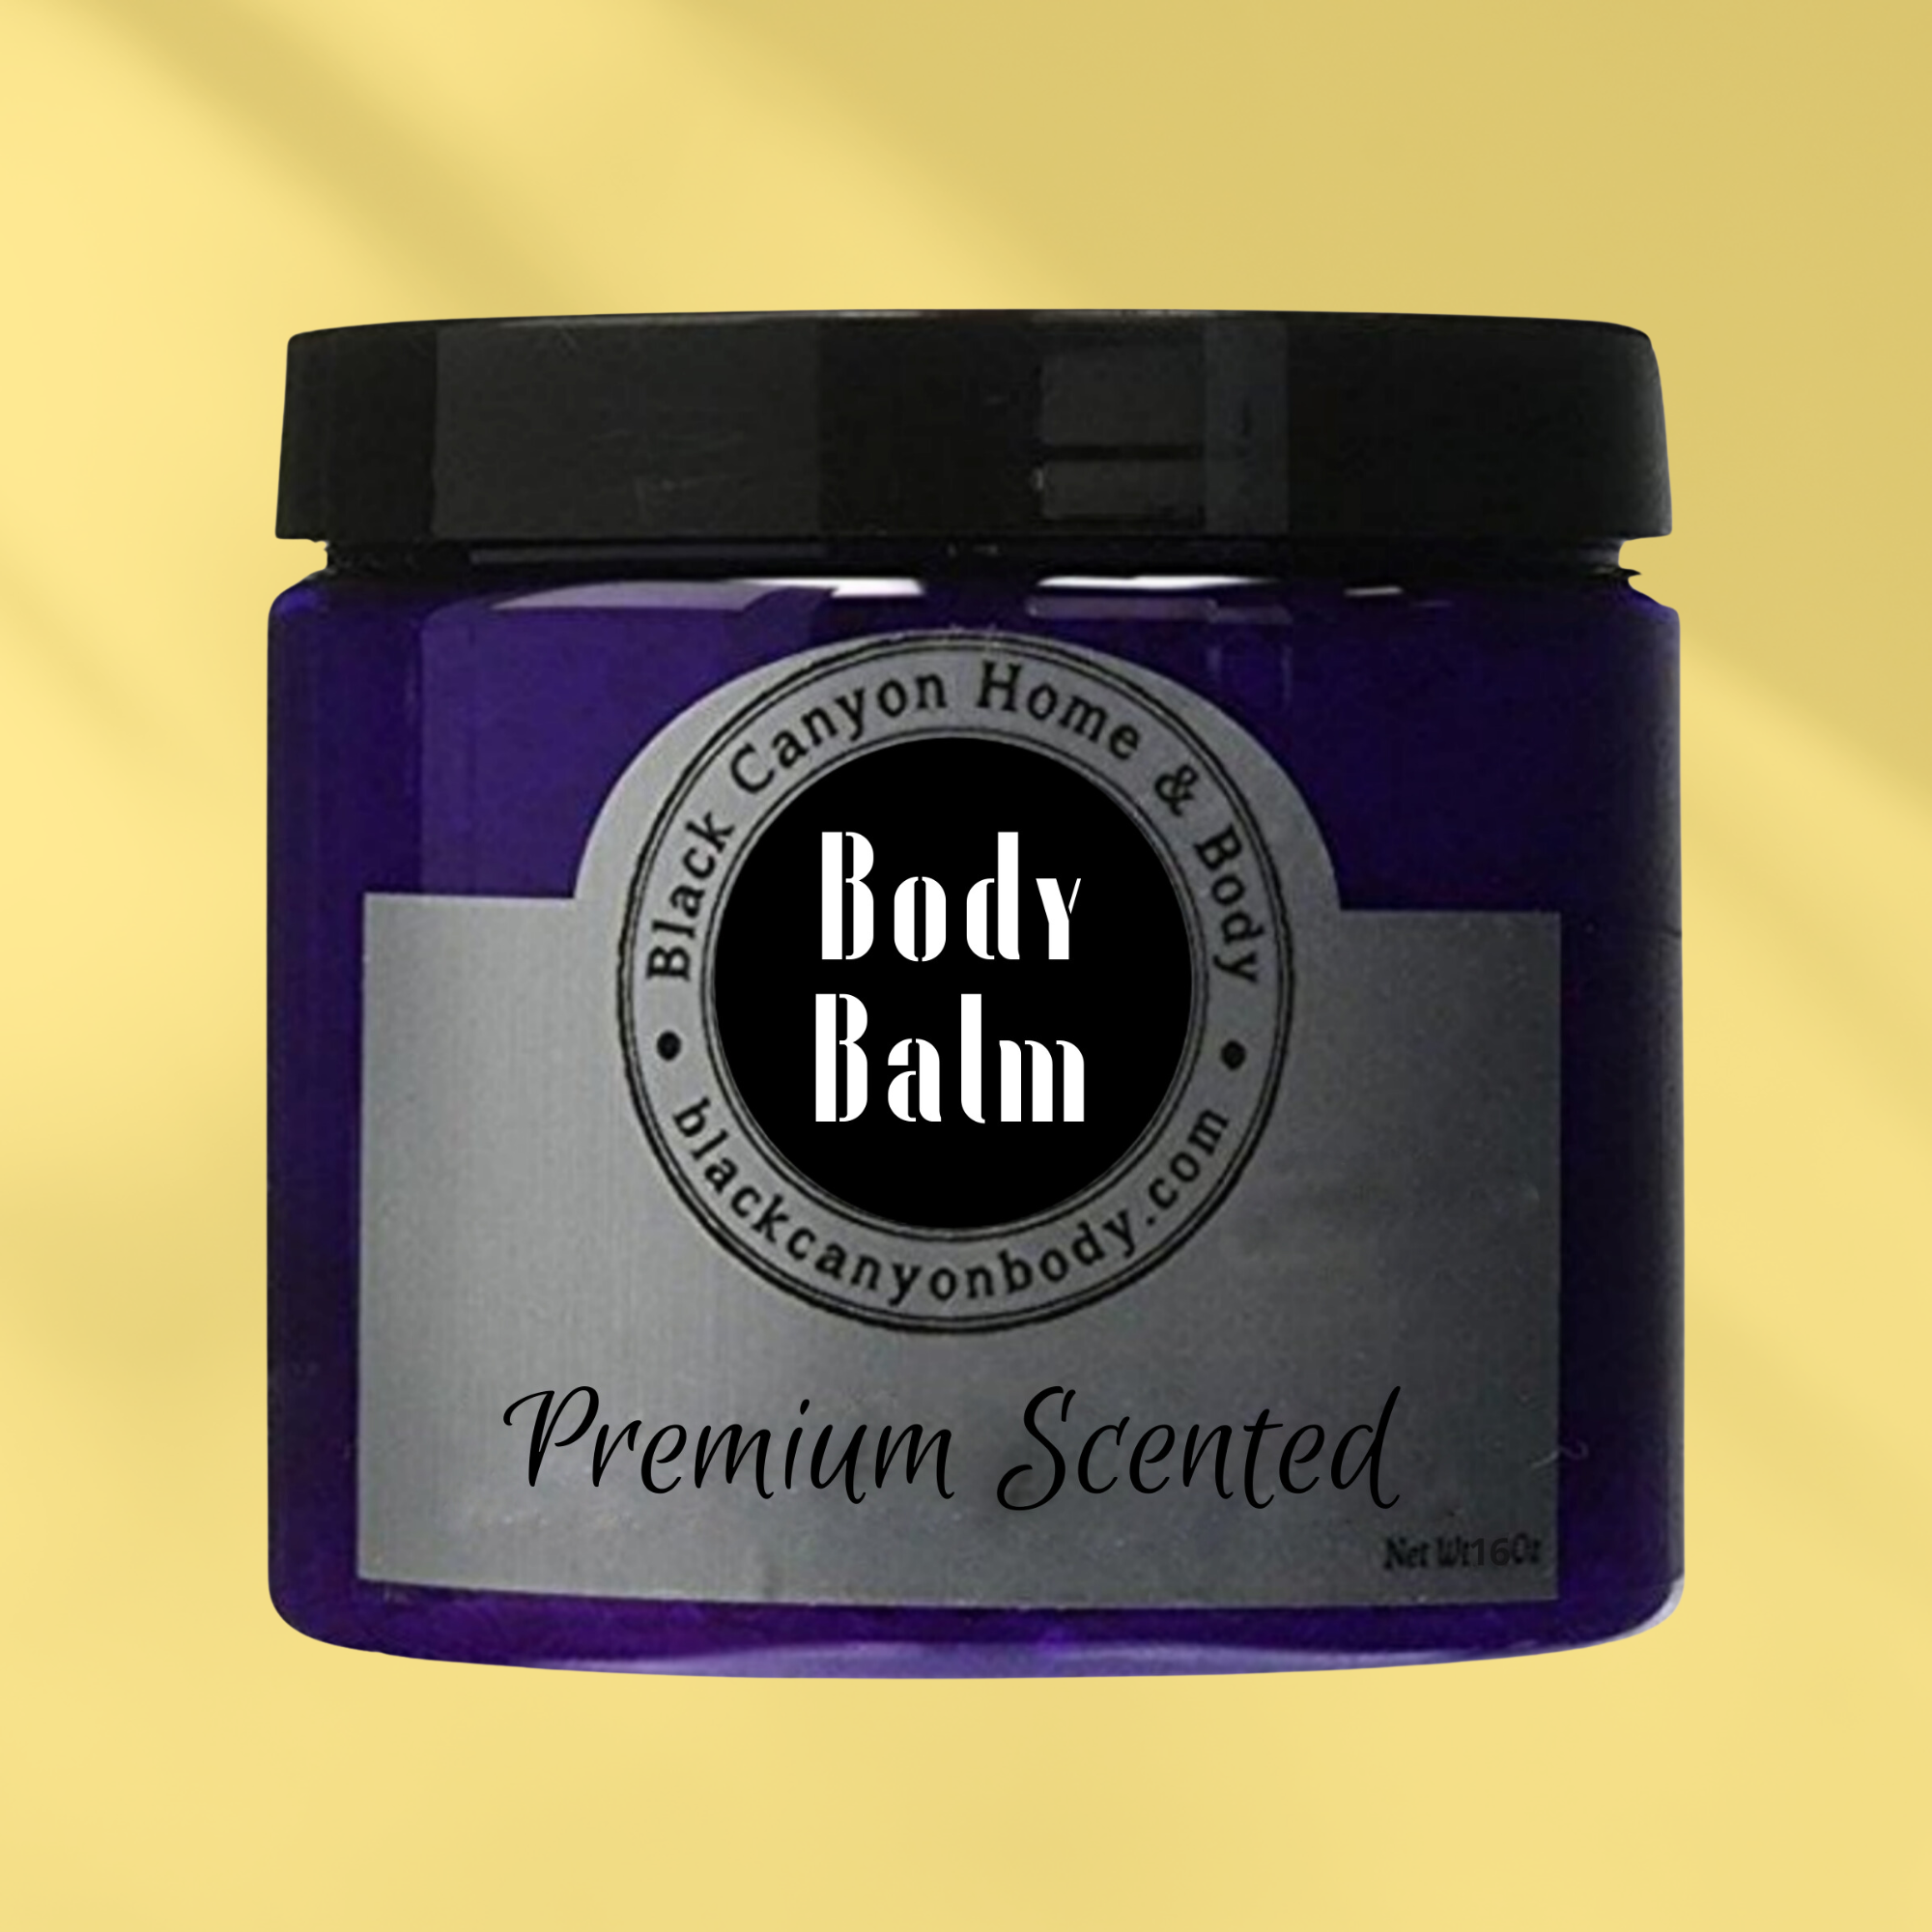 Paydens Cobalt Cedarwood & Citrus Scented Natural Body Balm with Shea For Men